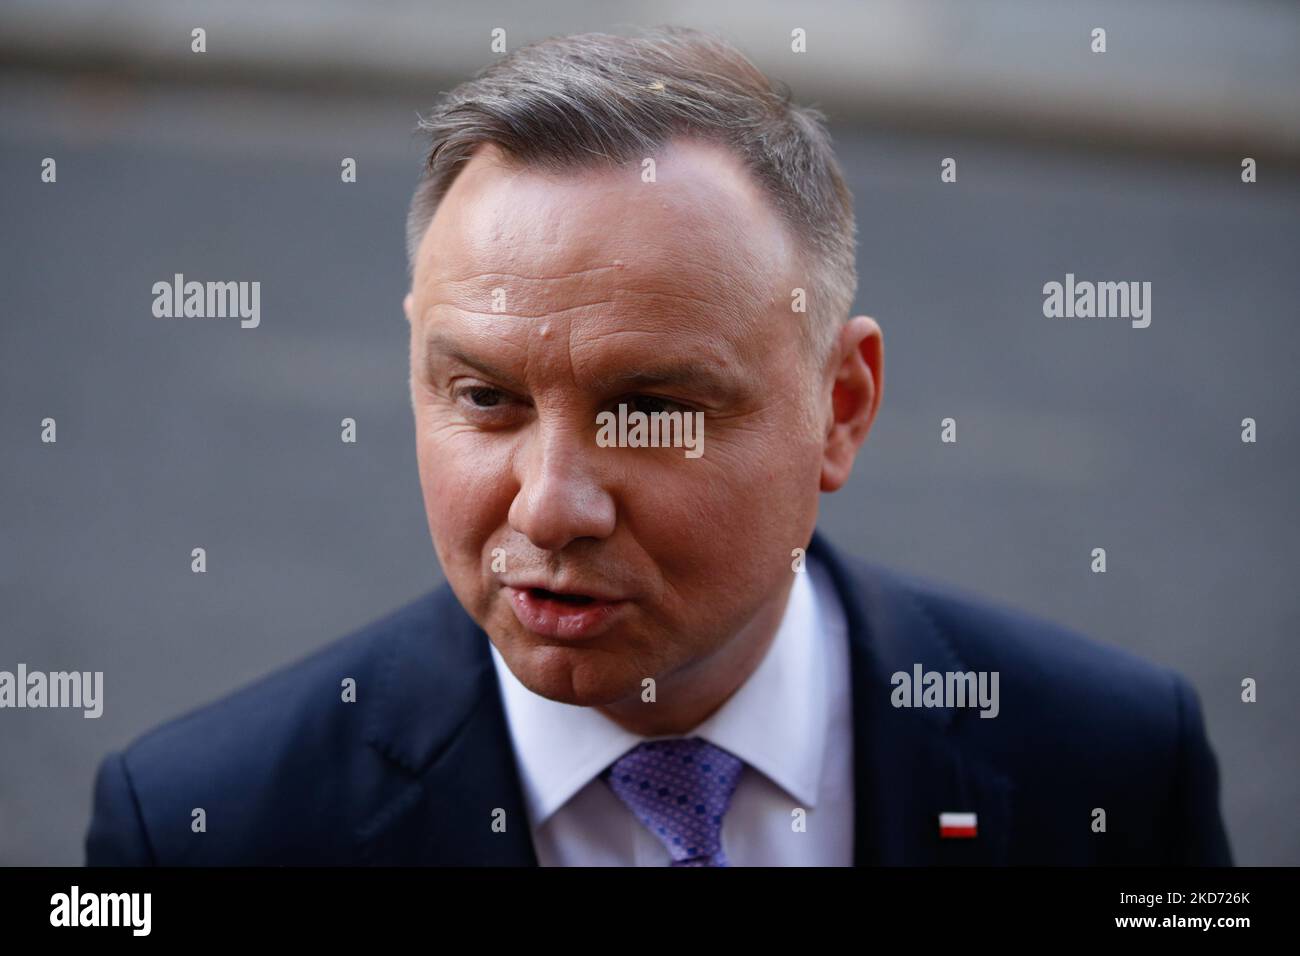 Polish President Andrzej Duda speaks to media after a meeting with British Prime Minister Boris Johnson at 10 Downing Street in London, England, on April 7, 2022. (Photo by David Cliff/NurPhoto) Stock Photo